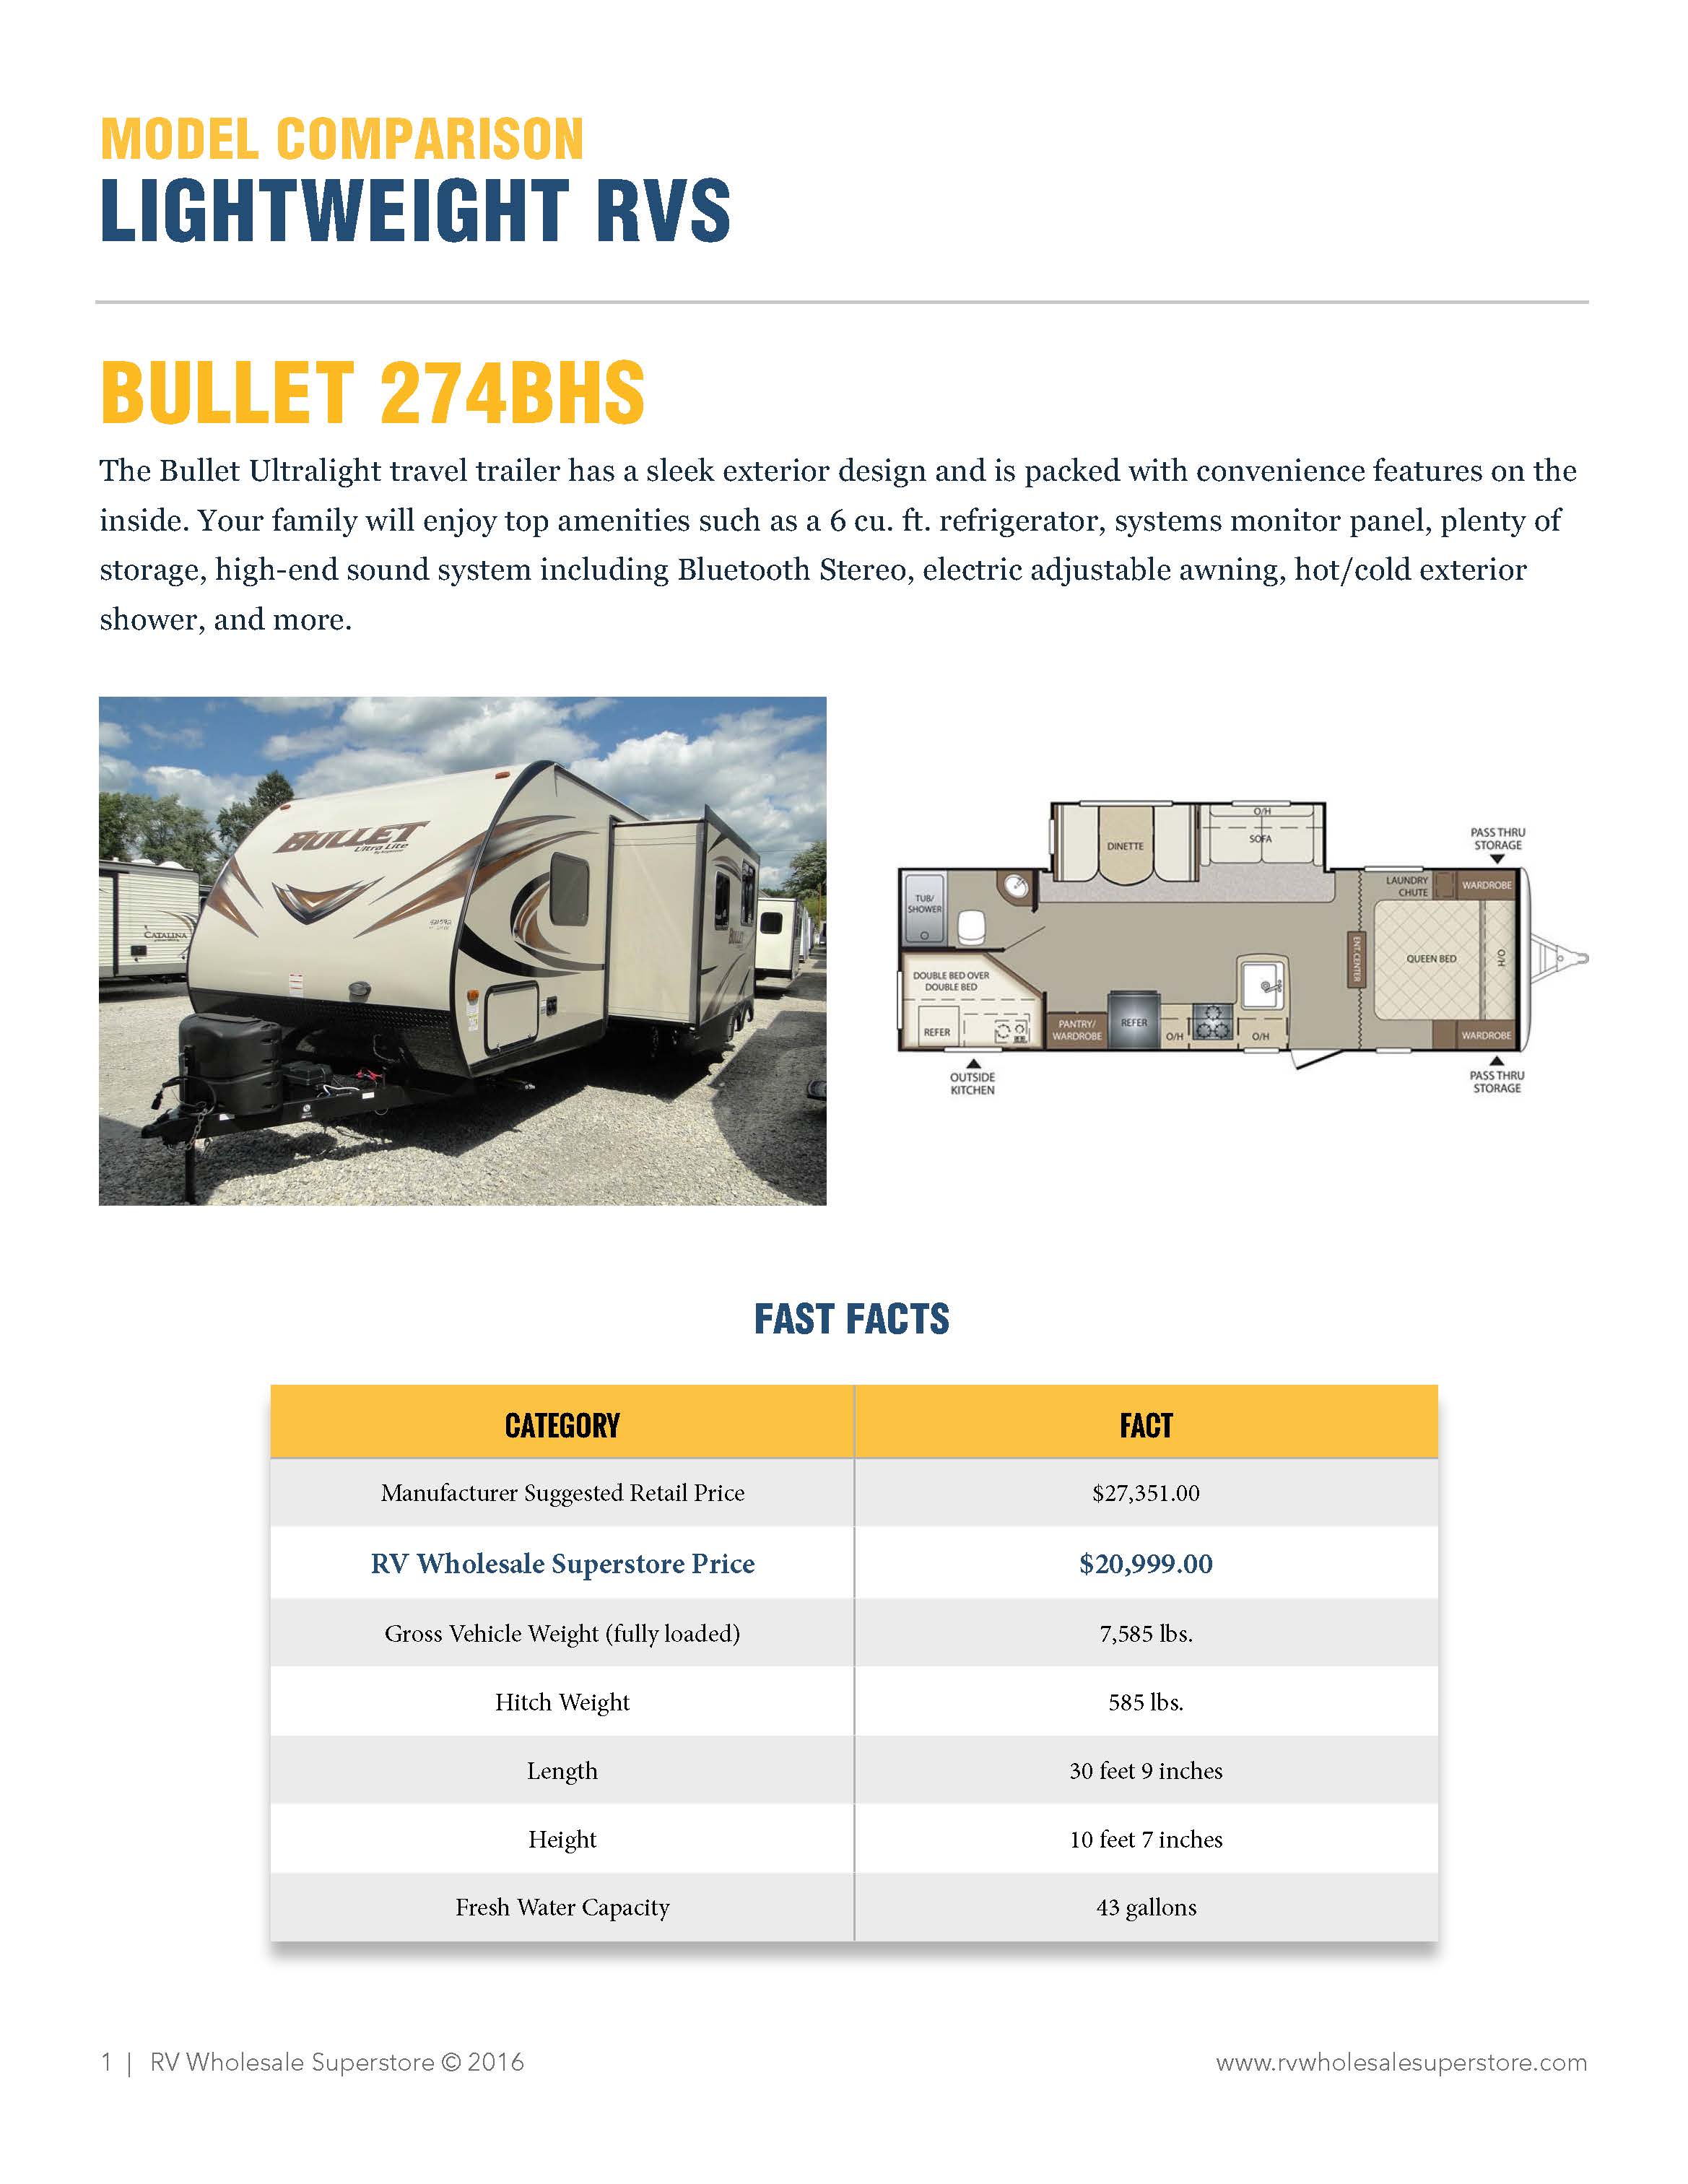 Lightweight-RV-2-page-Comparison-Guide_Page_1